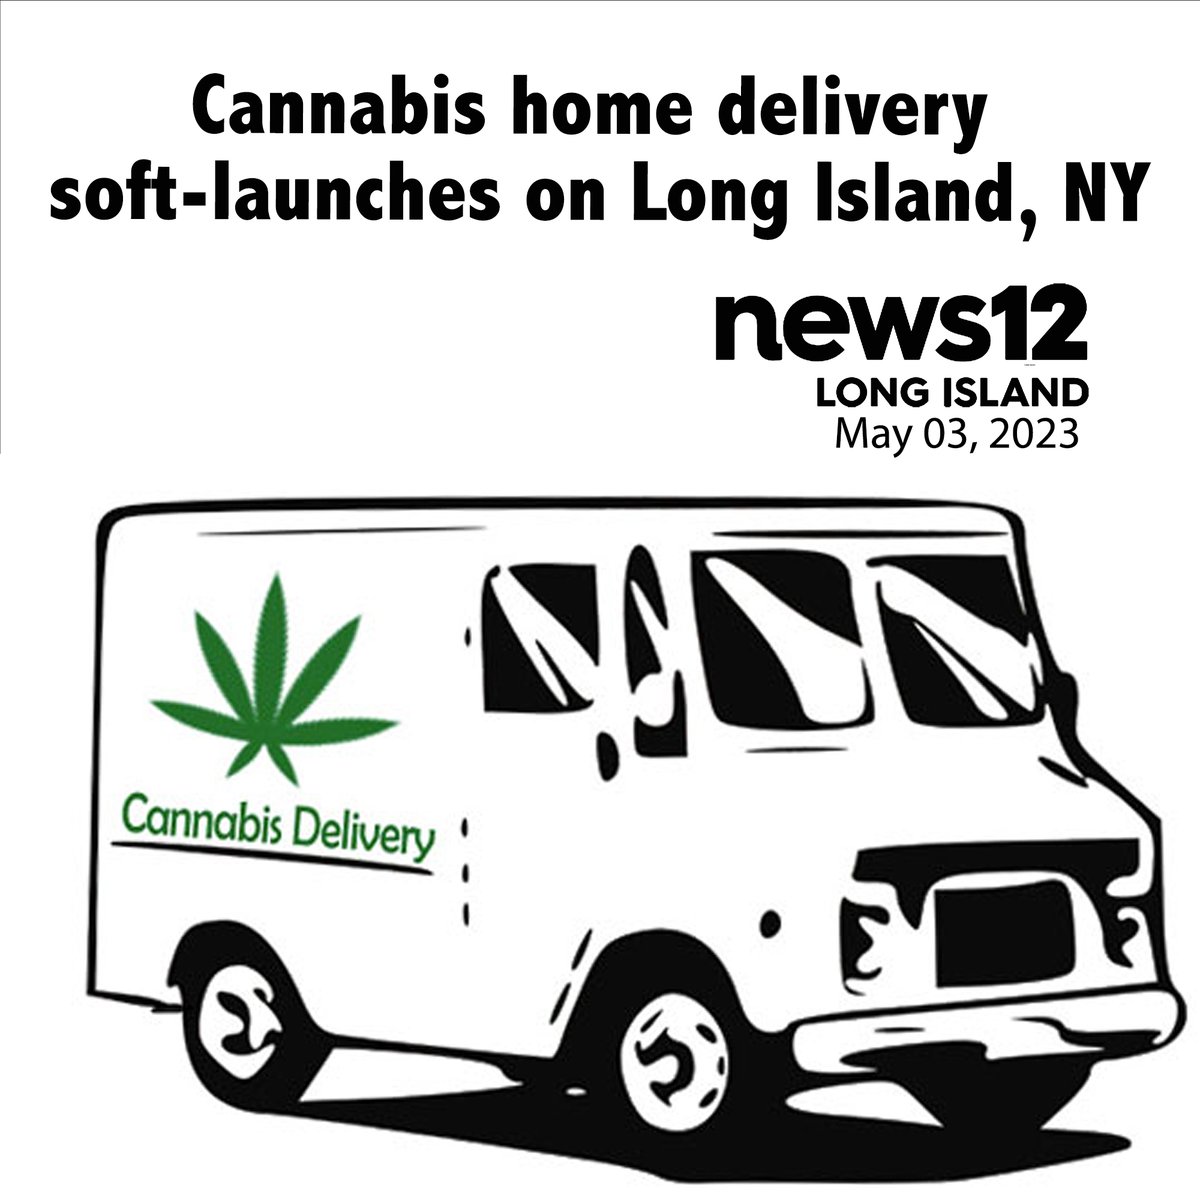 NEWS You Might Have Missed 

@longislandnycannabisclub  
@li_420_club @longisland_cannabisclub @longislandcannabisco #cannabiscommunity #420 #mmj #weedlife #cannabiseducation #cannabislife #420community #longislandcannabis #longisland #longislandny #ny